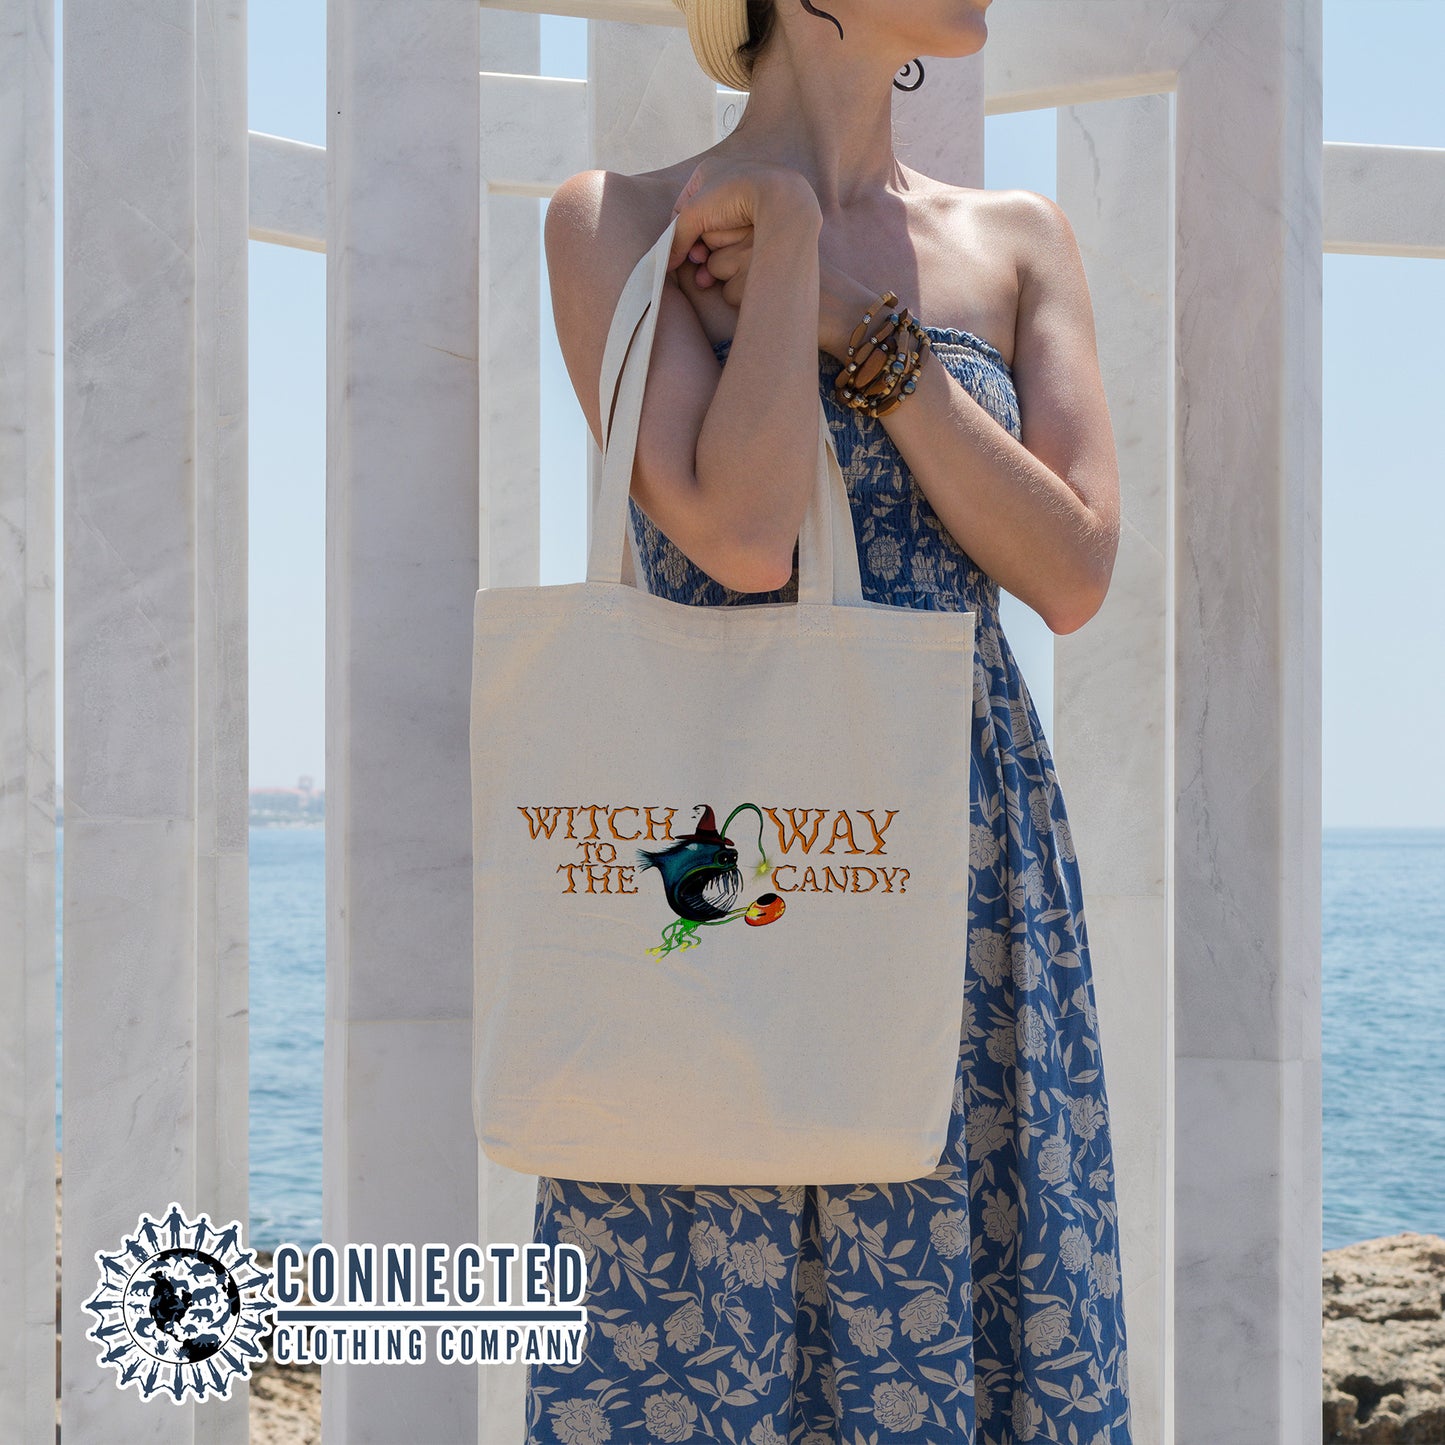 Witch Way To The Candy Anglerfish Tote Bag - Connected Clothing Company - 10% of proceeds donated to ocean conservation